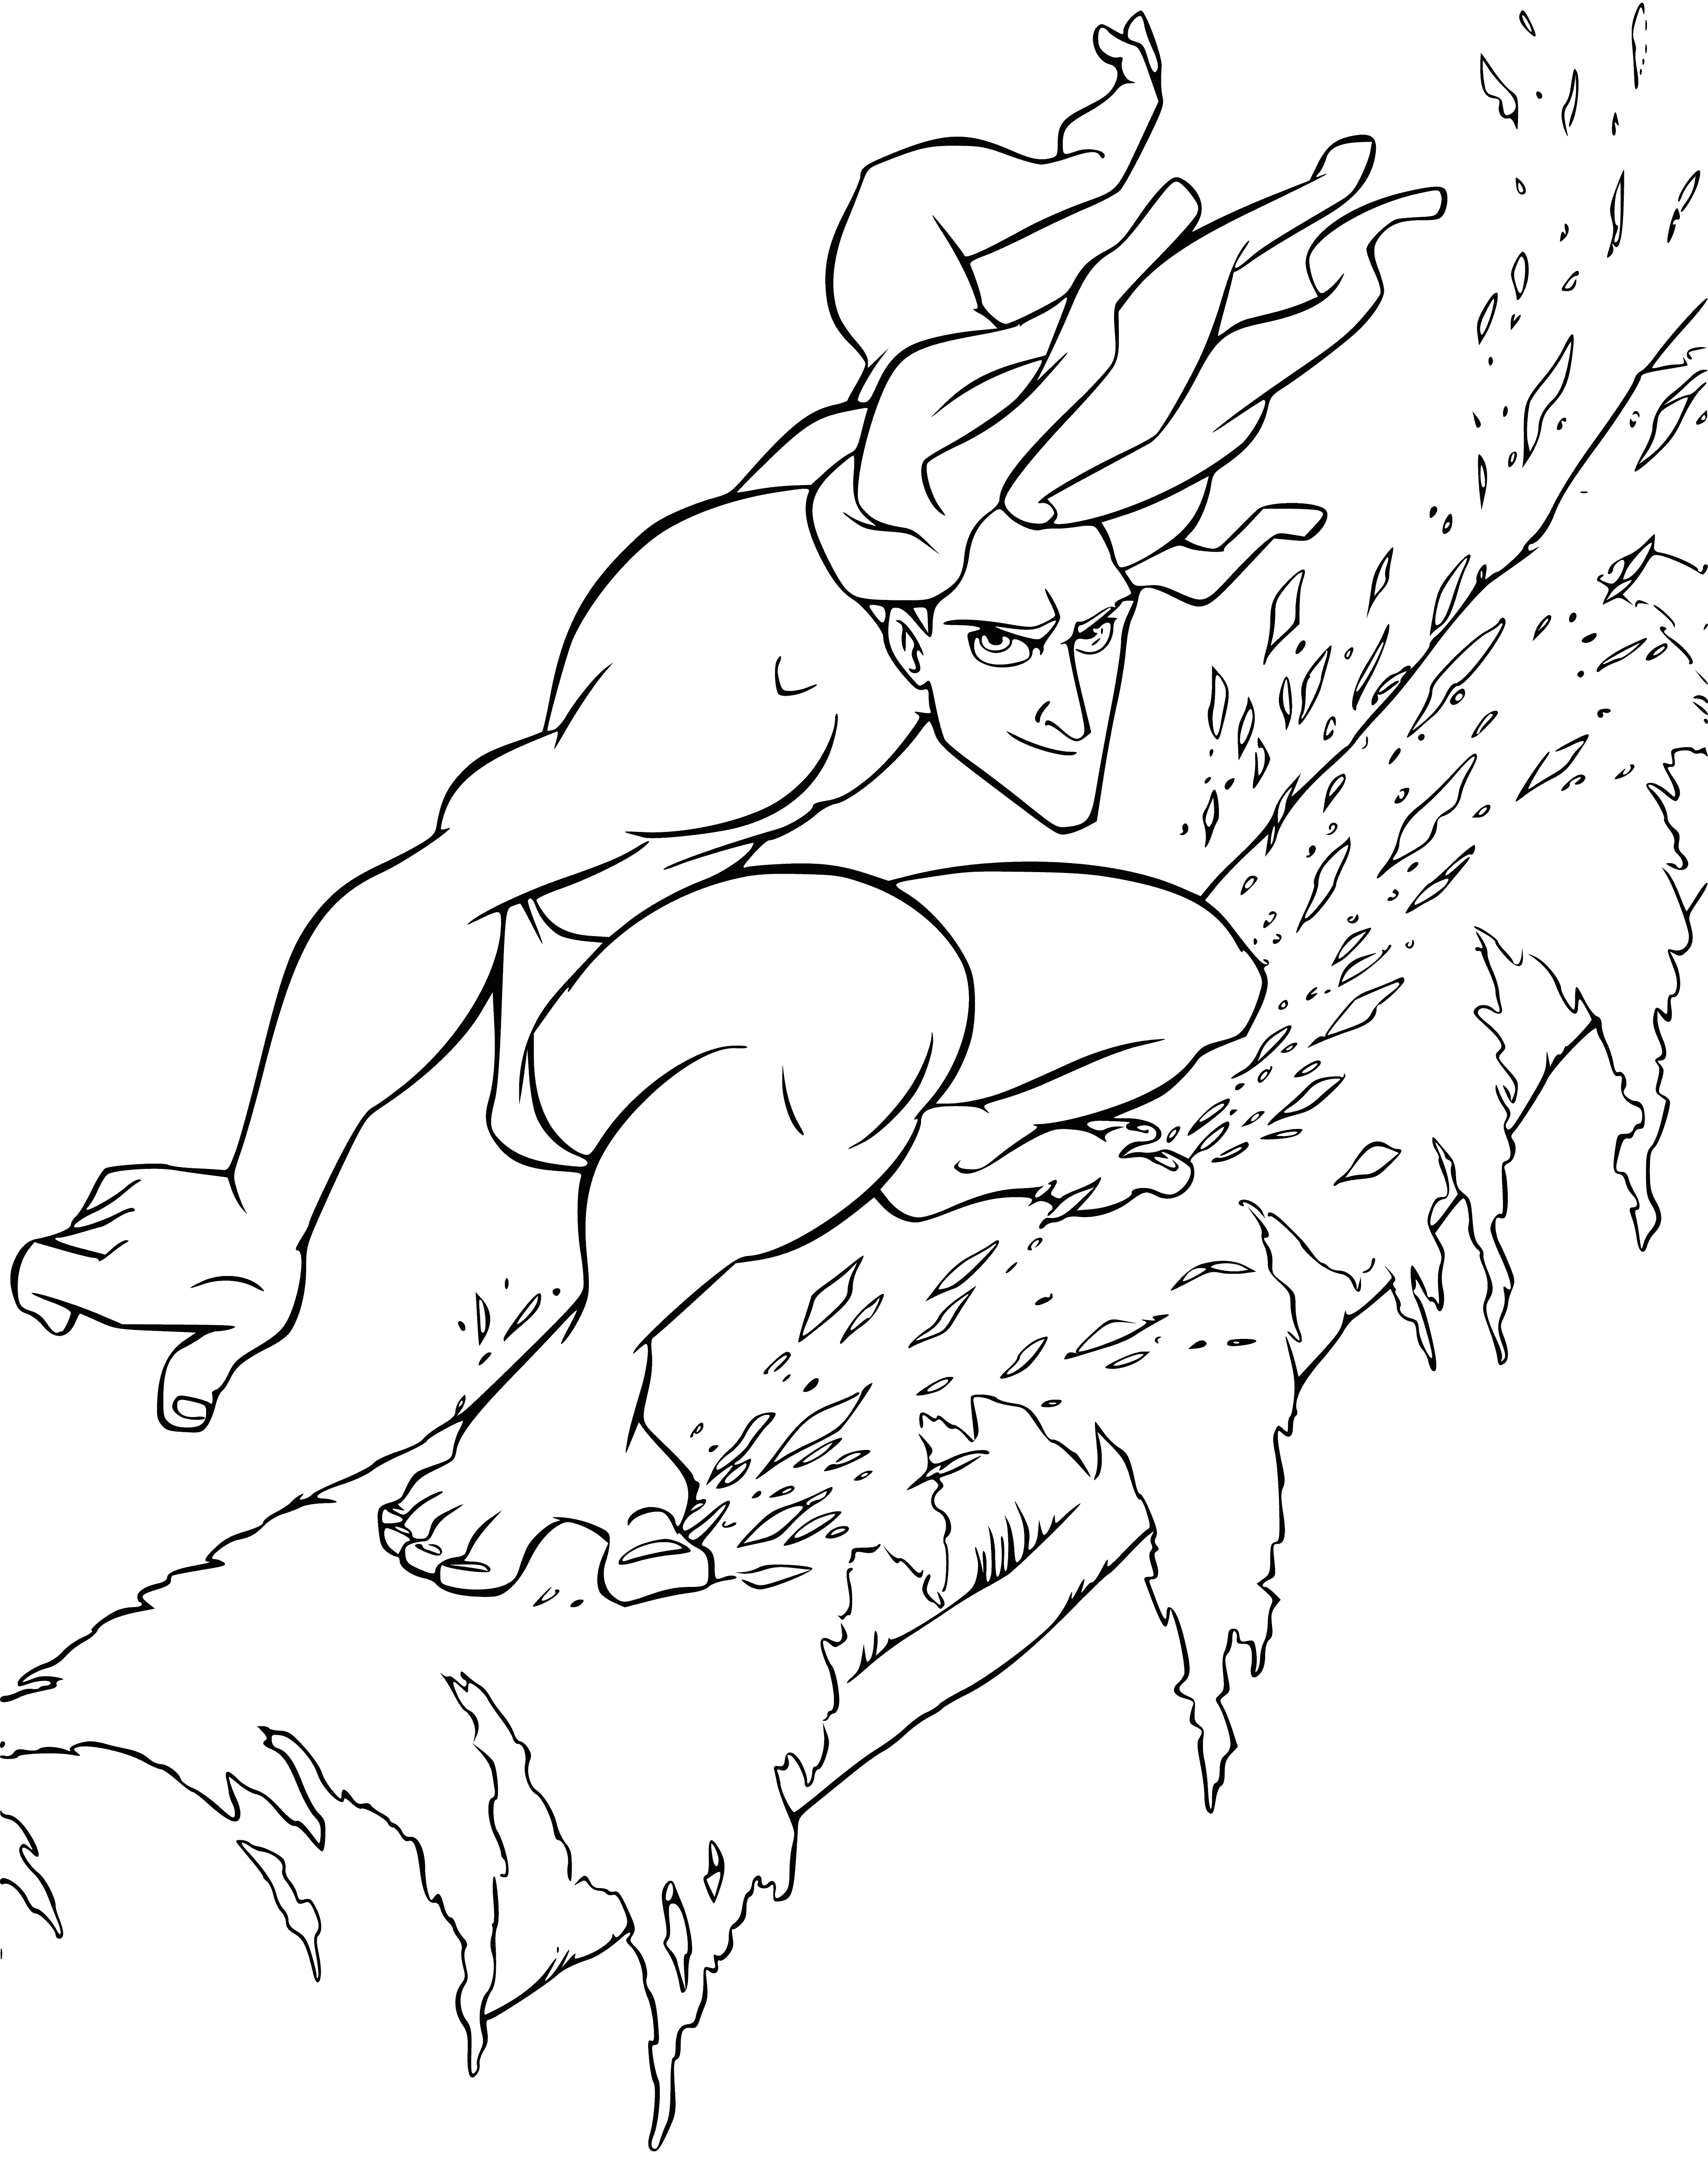 coloring page: A shirtless young man stands on a tree branch, outstretched with a loincloth around his waist and serious expression, long dark hair blowing in the wind.